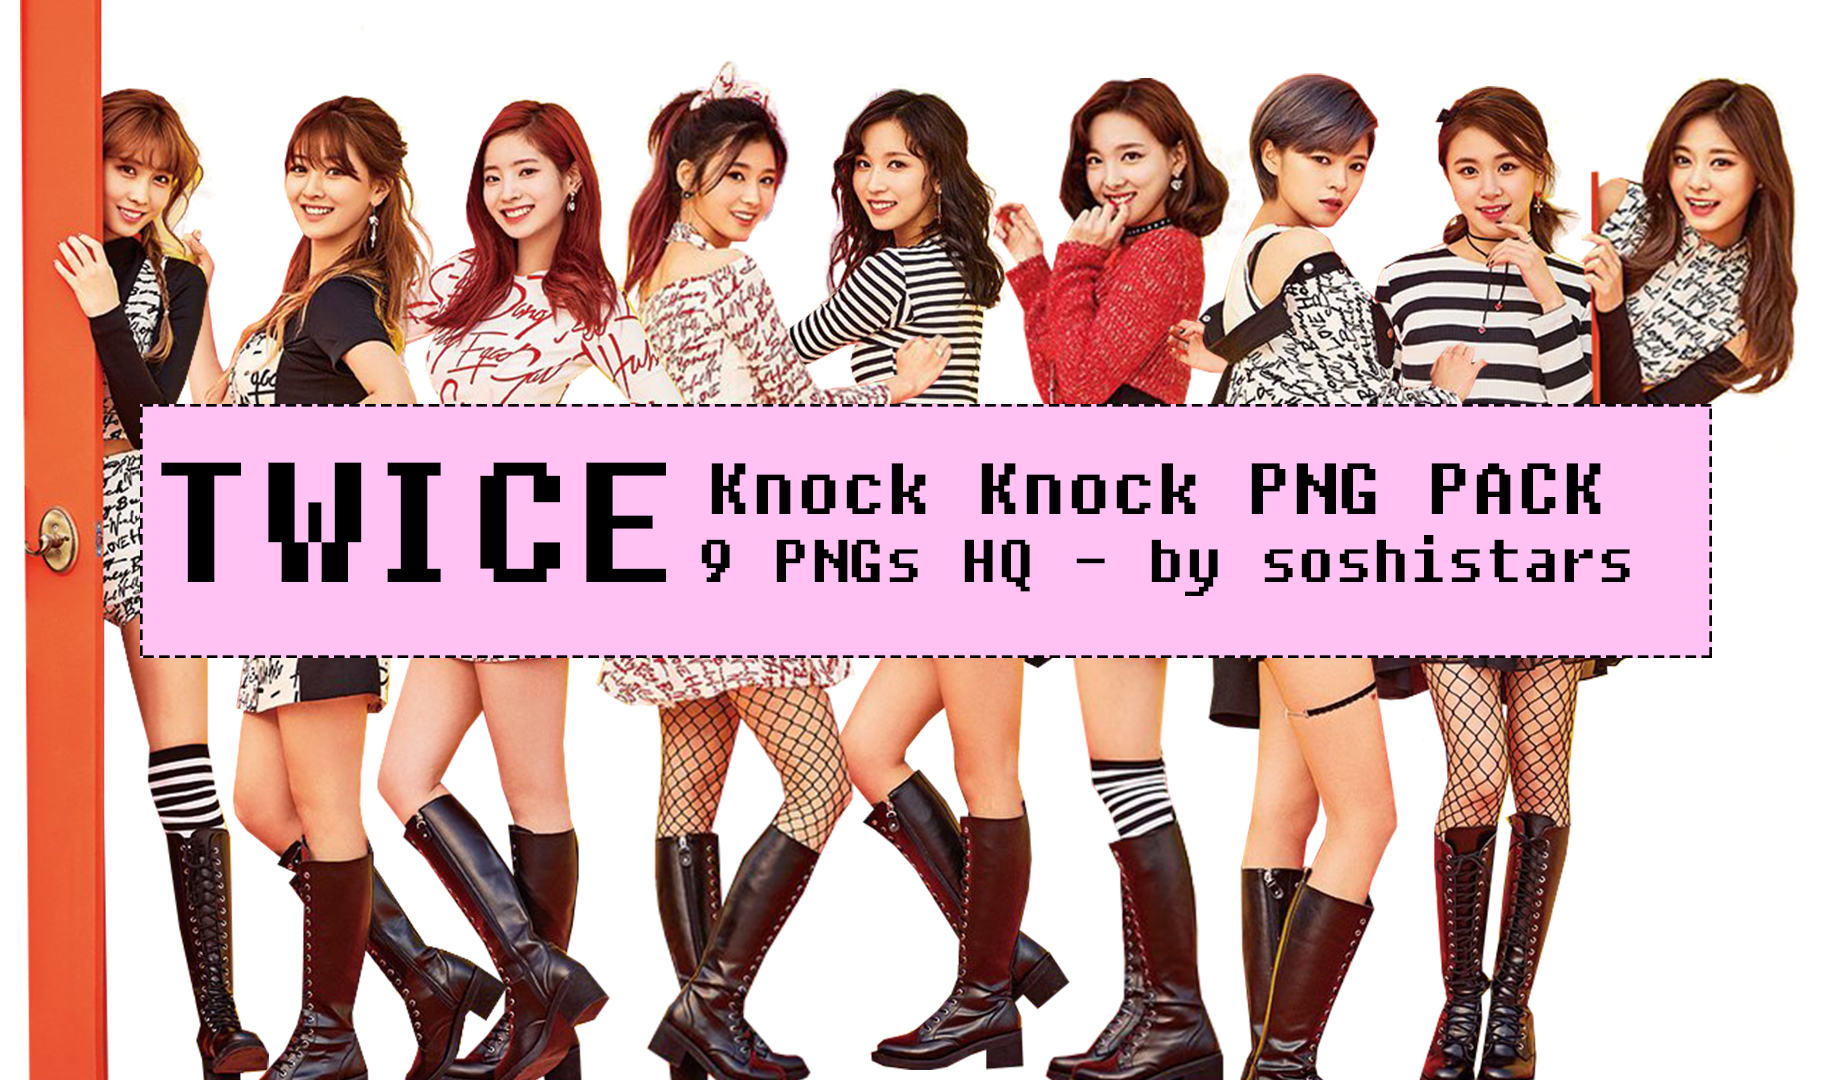 . Hdpng.com Twice Png Pack Knock Knock By Soshistars By Soshistars - Knock, Transparent background PNG HD thumbnail